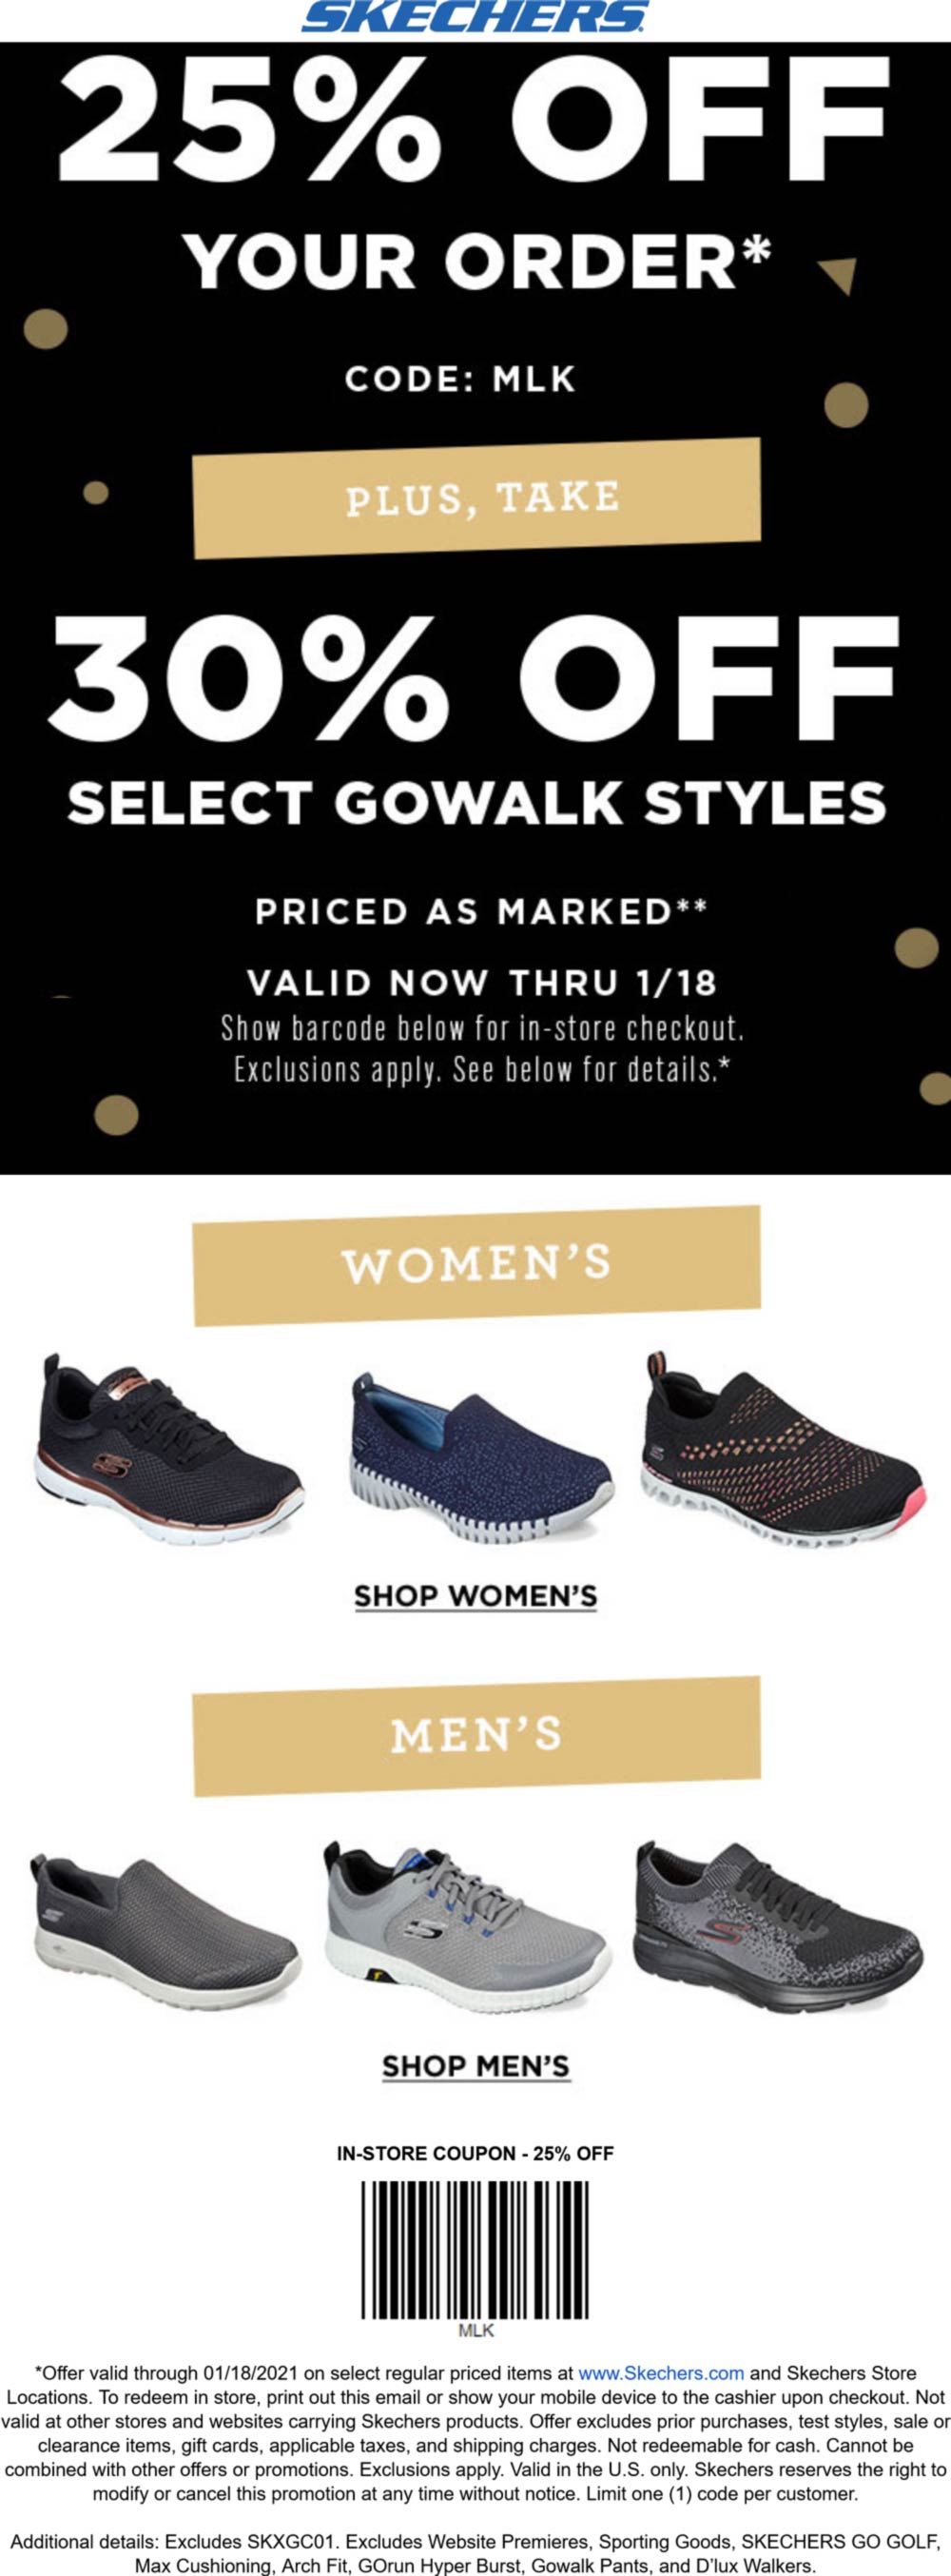 Skechers stores Coupon  25% off shoes at Skechers, or online via promo code MLK #skechers 